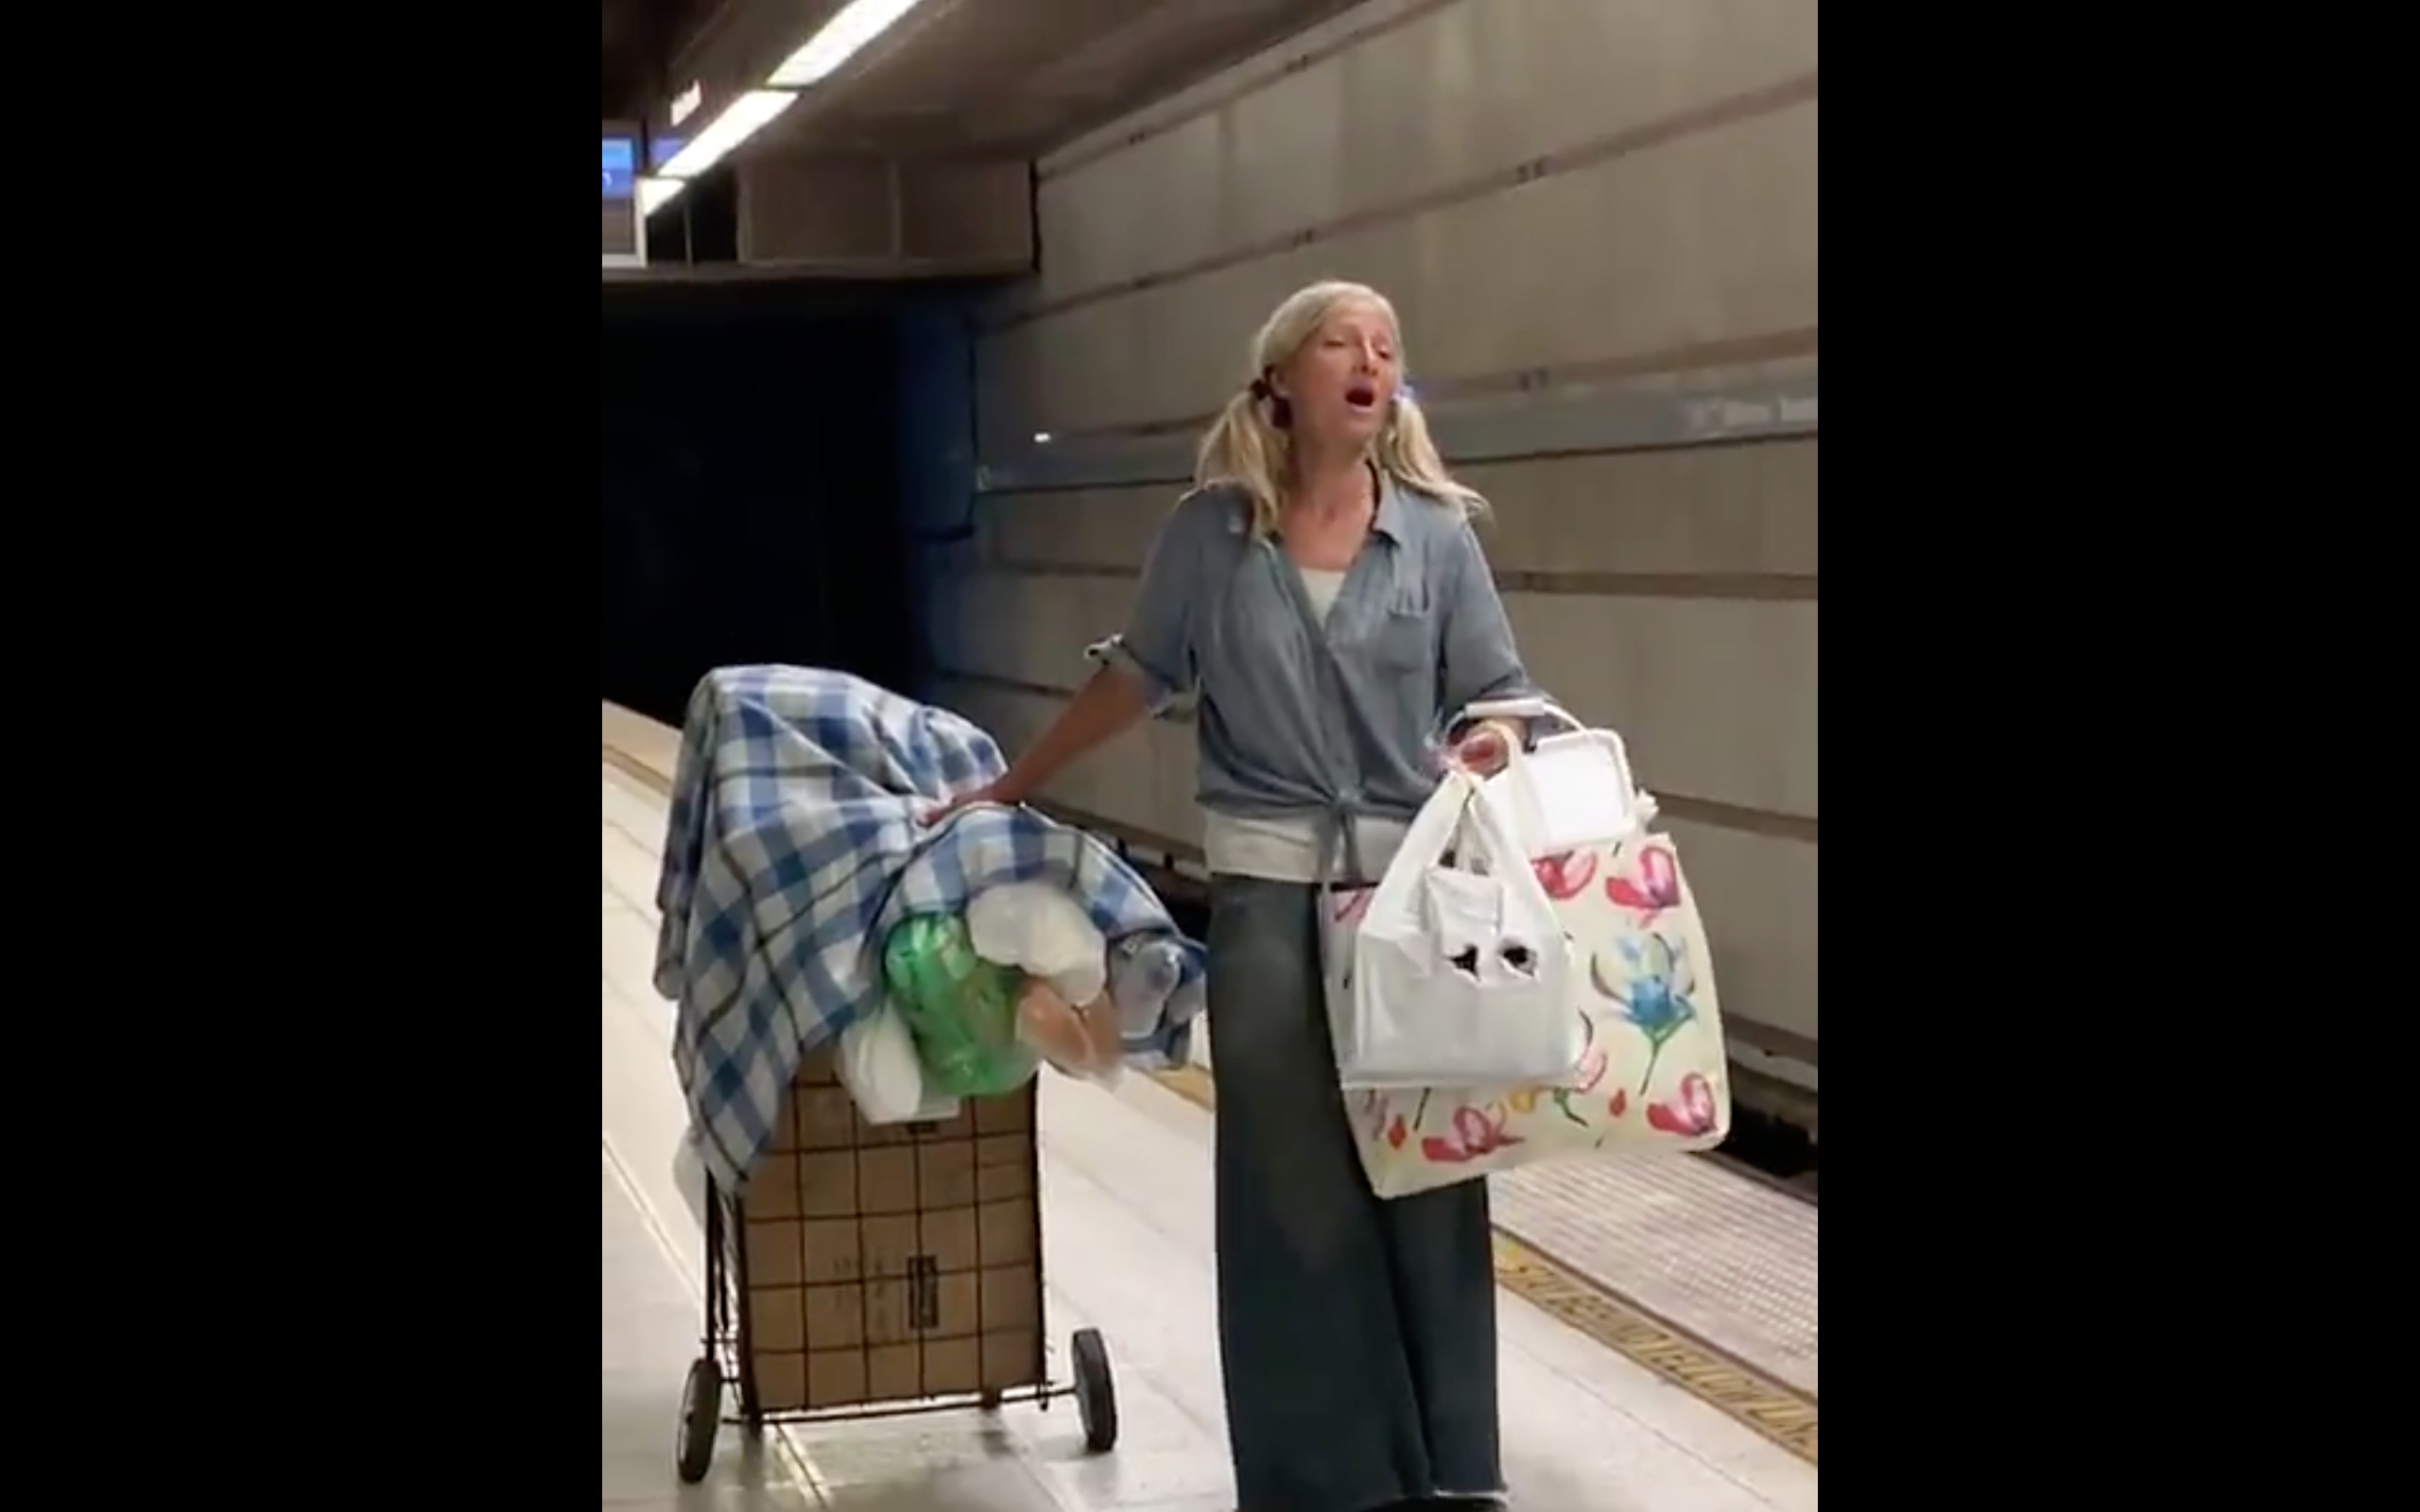 PHOTO: The Los Angeles Police Department posted this video to their Twitter account of a woman singing in the Los Angeles subway.